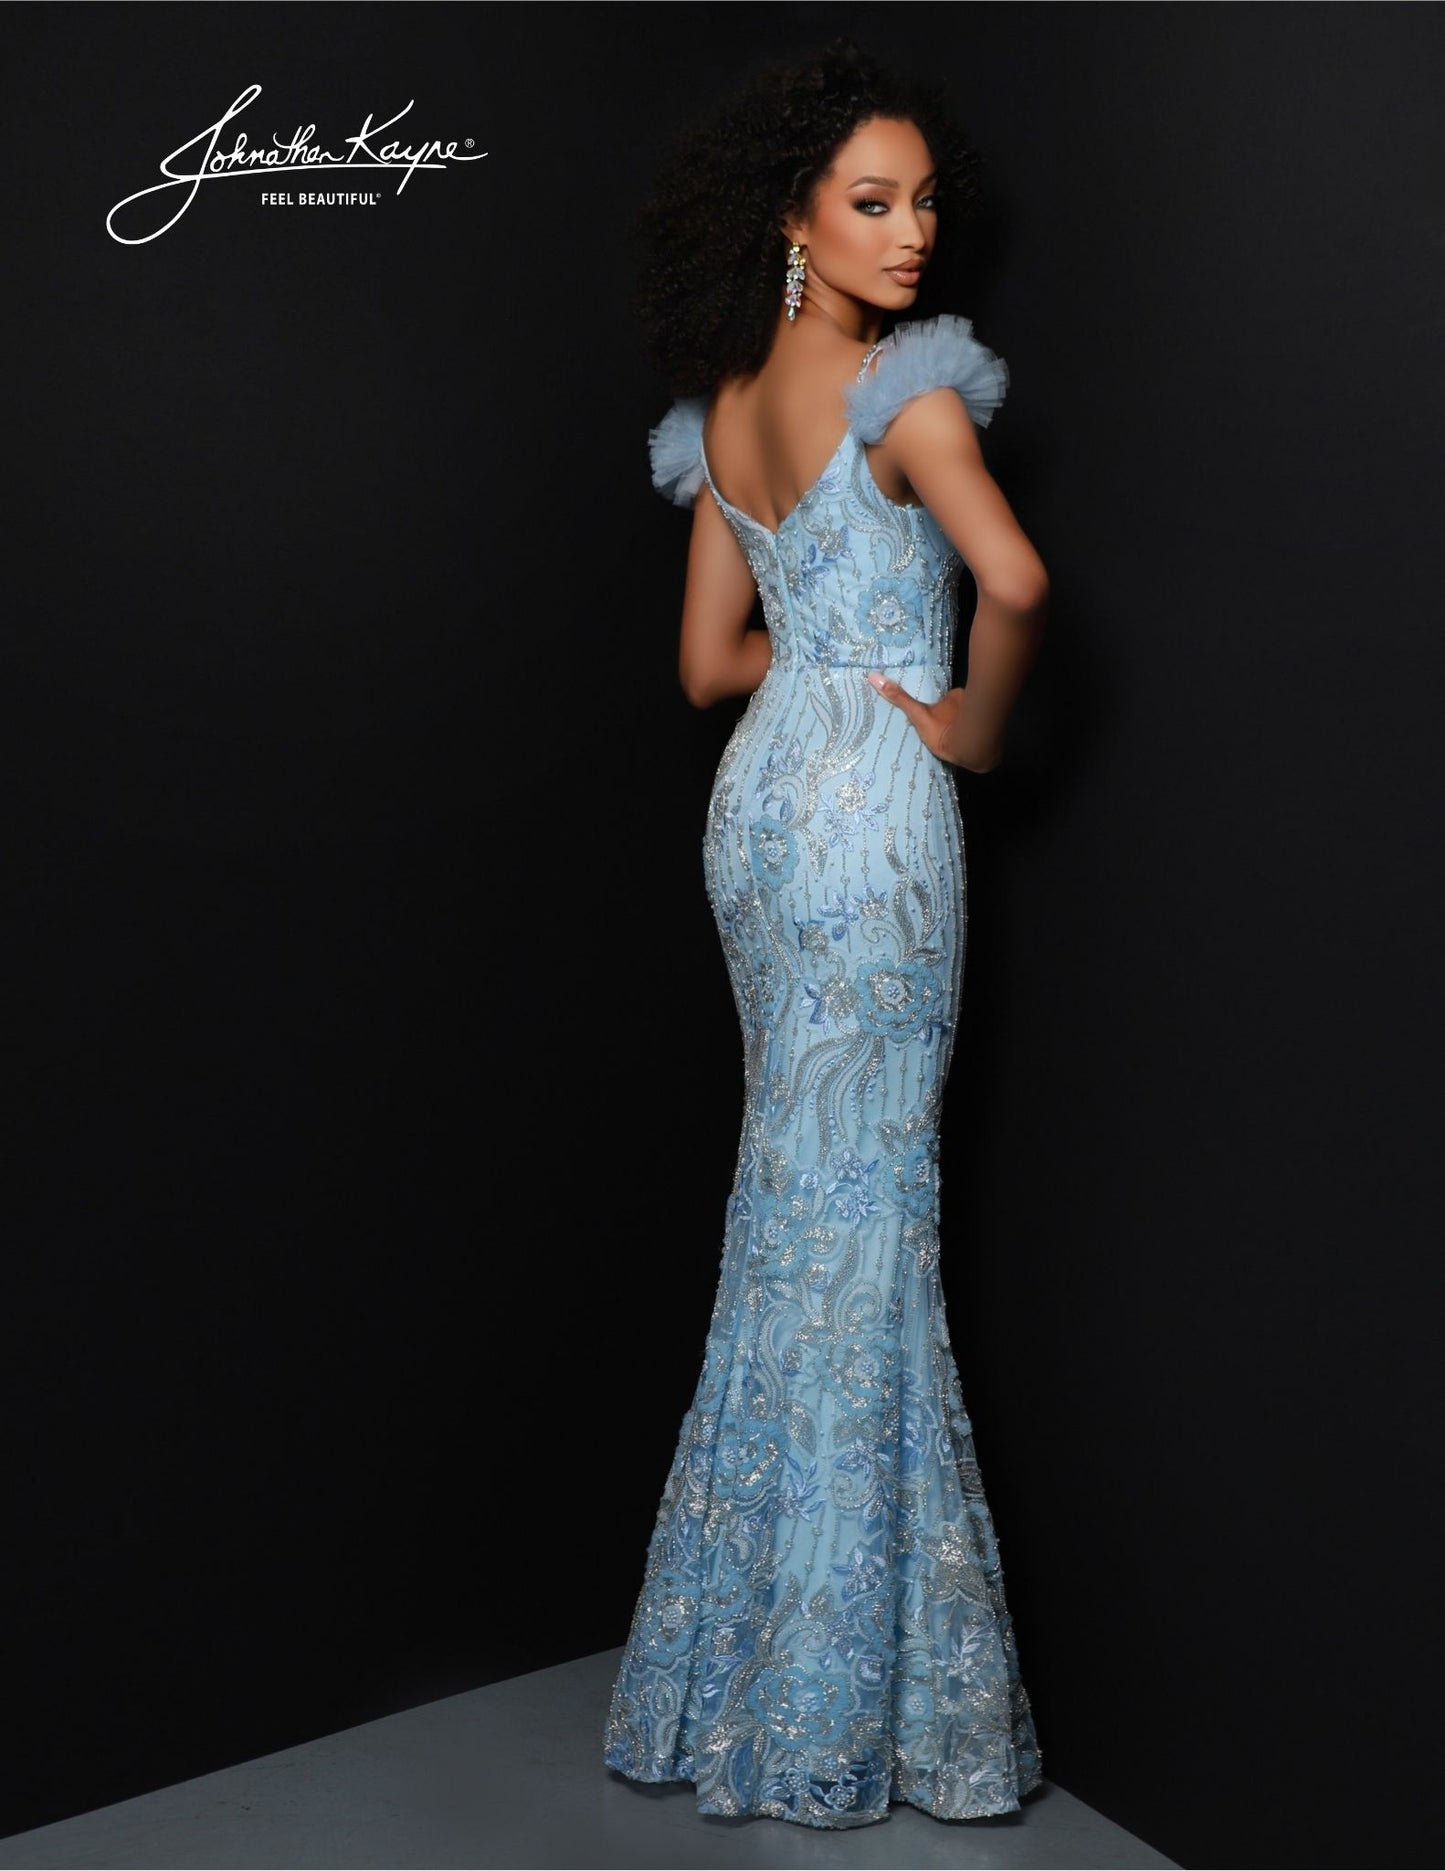 Johnathan Kayne 2828 is the perfect choice for your formal occasion. This fitted mermaid gown features an off-shoulder neckline, V-neck, beaded mesh and an overskirt. The timeless design will make sure you look elegant and sophisticated. Discover icy perfection! This Beaded Mesh gown shimmers like ice crystals, while the detachable overskirt completes your transformation into the true queen of prom.